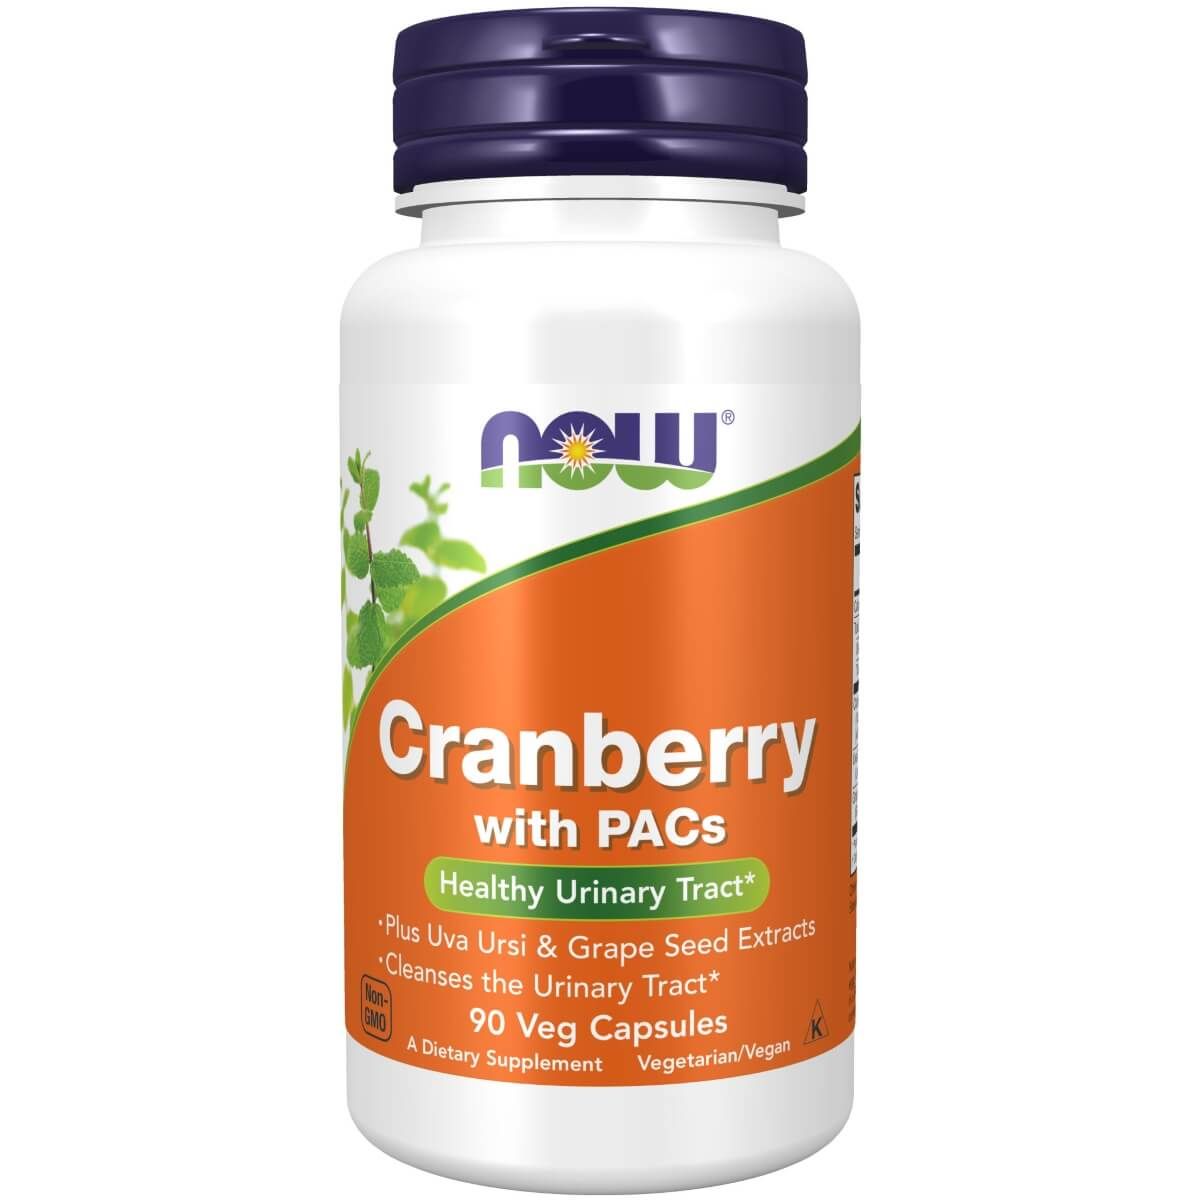 Photos - Vitamins & Minerals Now Foods Cranberry with PACs 90 Veg Capsules PBW-P27699 